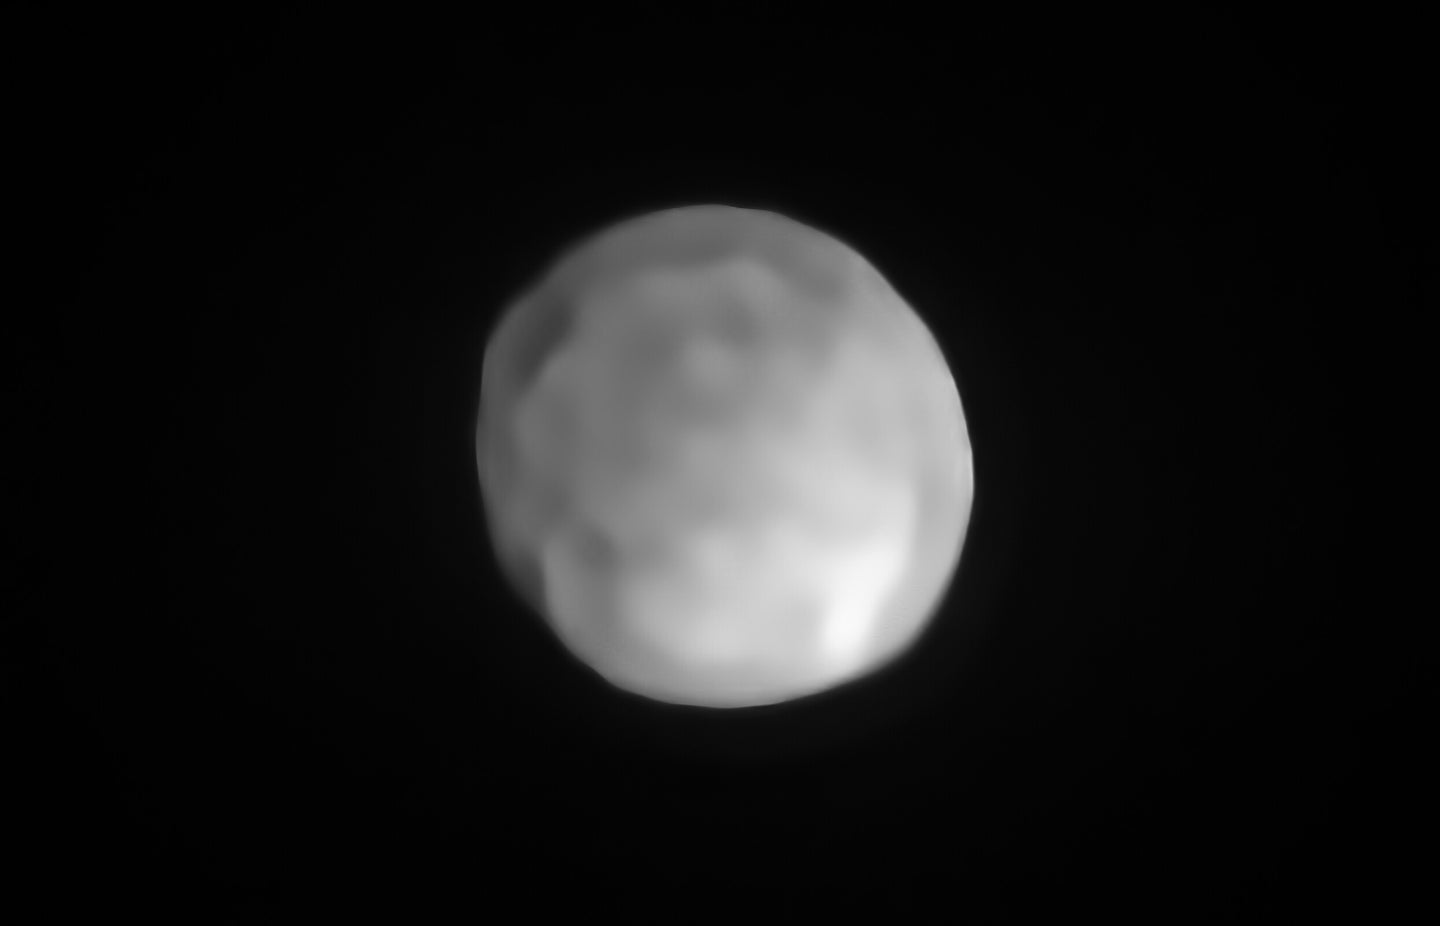 A new SPHERE/VLT image of Hygiea, which could be the Solar System’s smallest dwarf planet yet. As an object in the main asteroid belt, Hygiea satisfies right away three of the four requirements to be classified as a dwarf planet: it orbits around the Sun, it is not a moon and, unlike a planet, it has not cleared the neighbourhood around its orbit. The final requirement is that it have enough mass that its own gravity pulls it into a roughly spherical shape. This is what VLT observations have now revealed about Hygiea.